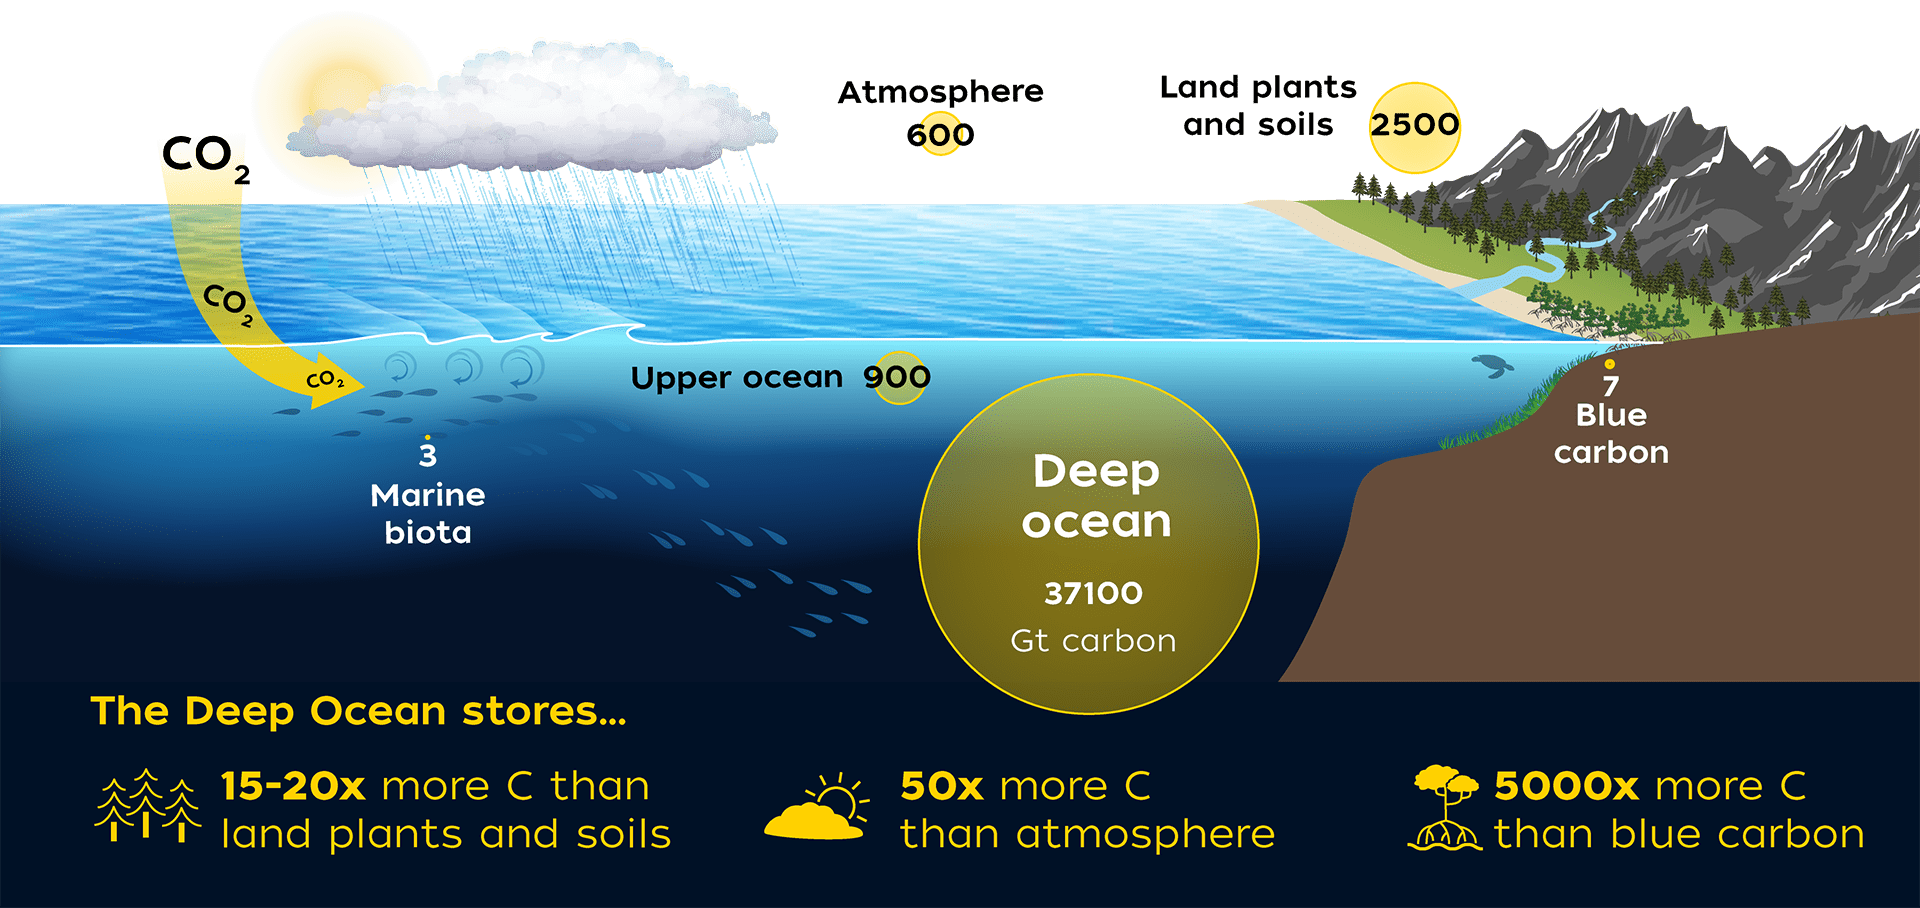 The deep ocean is the largest reservoir of carbon on the planet, containing 37,100 gigatons—roughly 15-20 times more than that sequestered by land plants. (Illustration by WHOI Creative, © Woods Hole Oceanographic Institution)